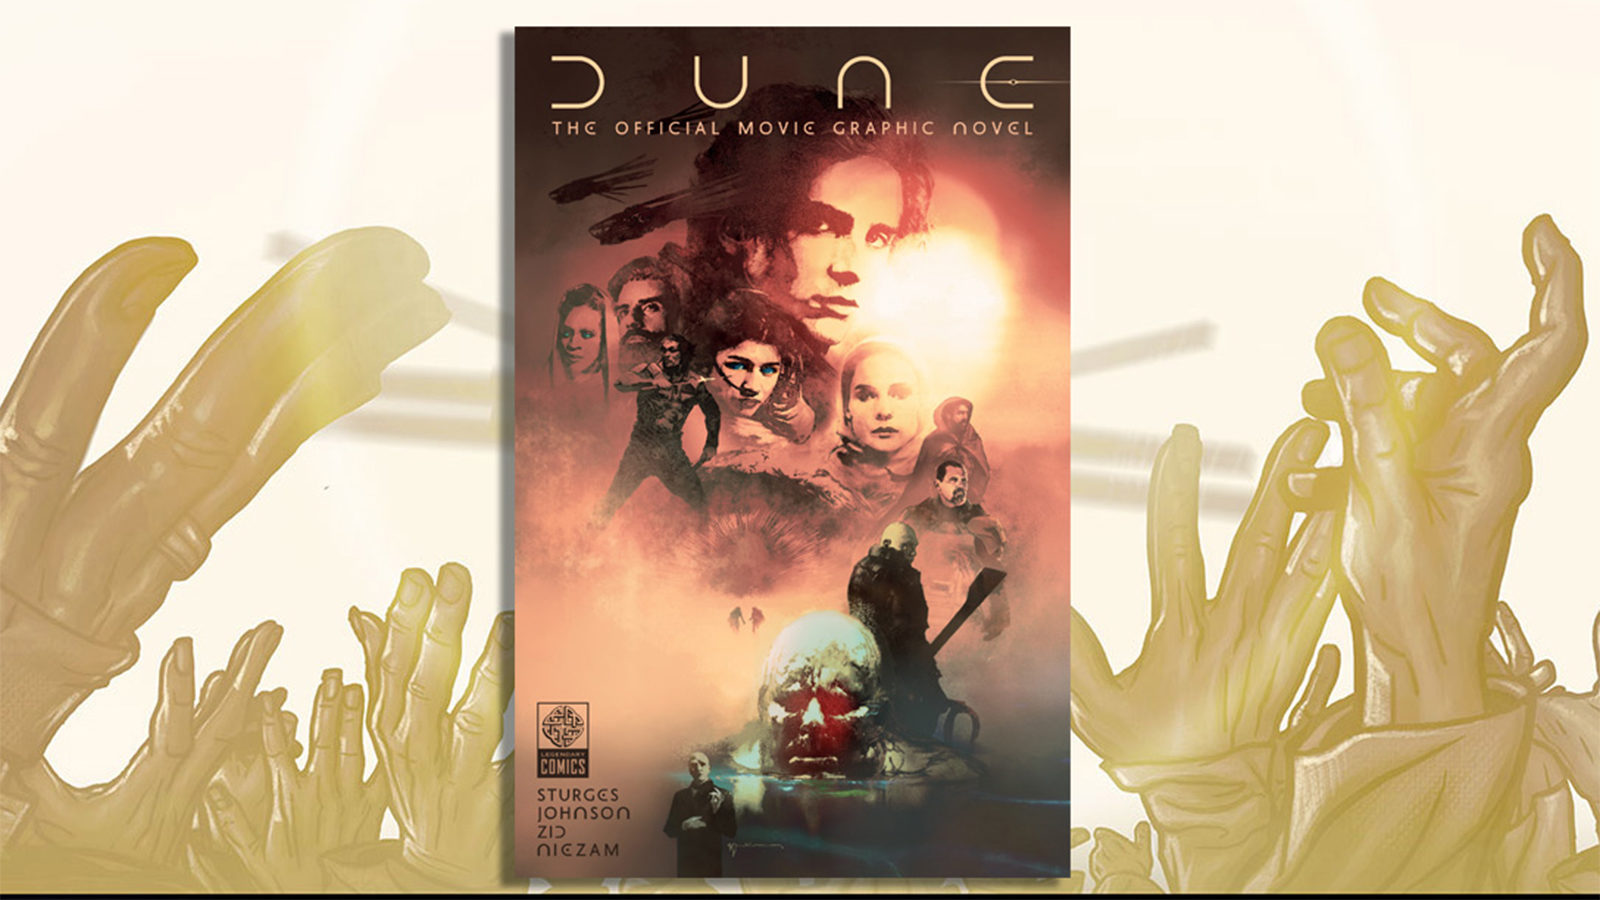 Legendary Comics’ Presents Dune: The Official Movie Graphic Novel Based on the Academy Award-Winning Sci-Fi Epic on Sale December 6